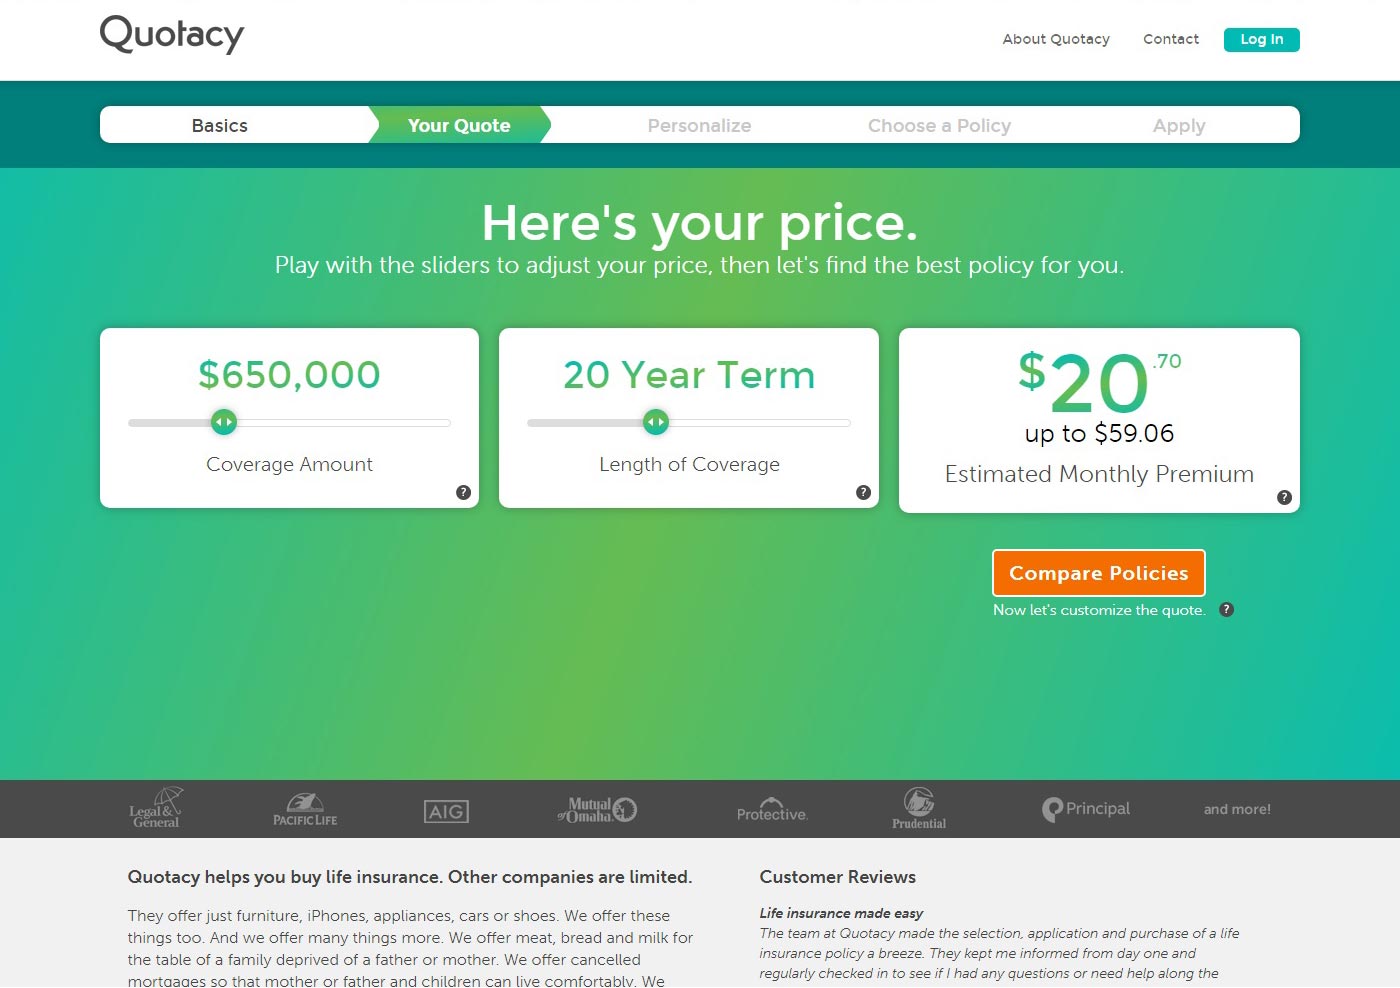 screenshot of Quotacy quoting tool showing $650,000 term life insurance policy